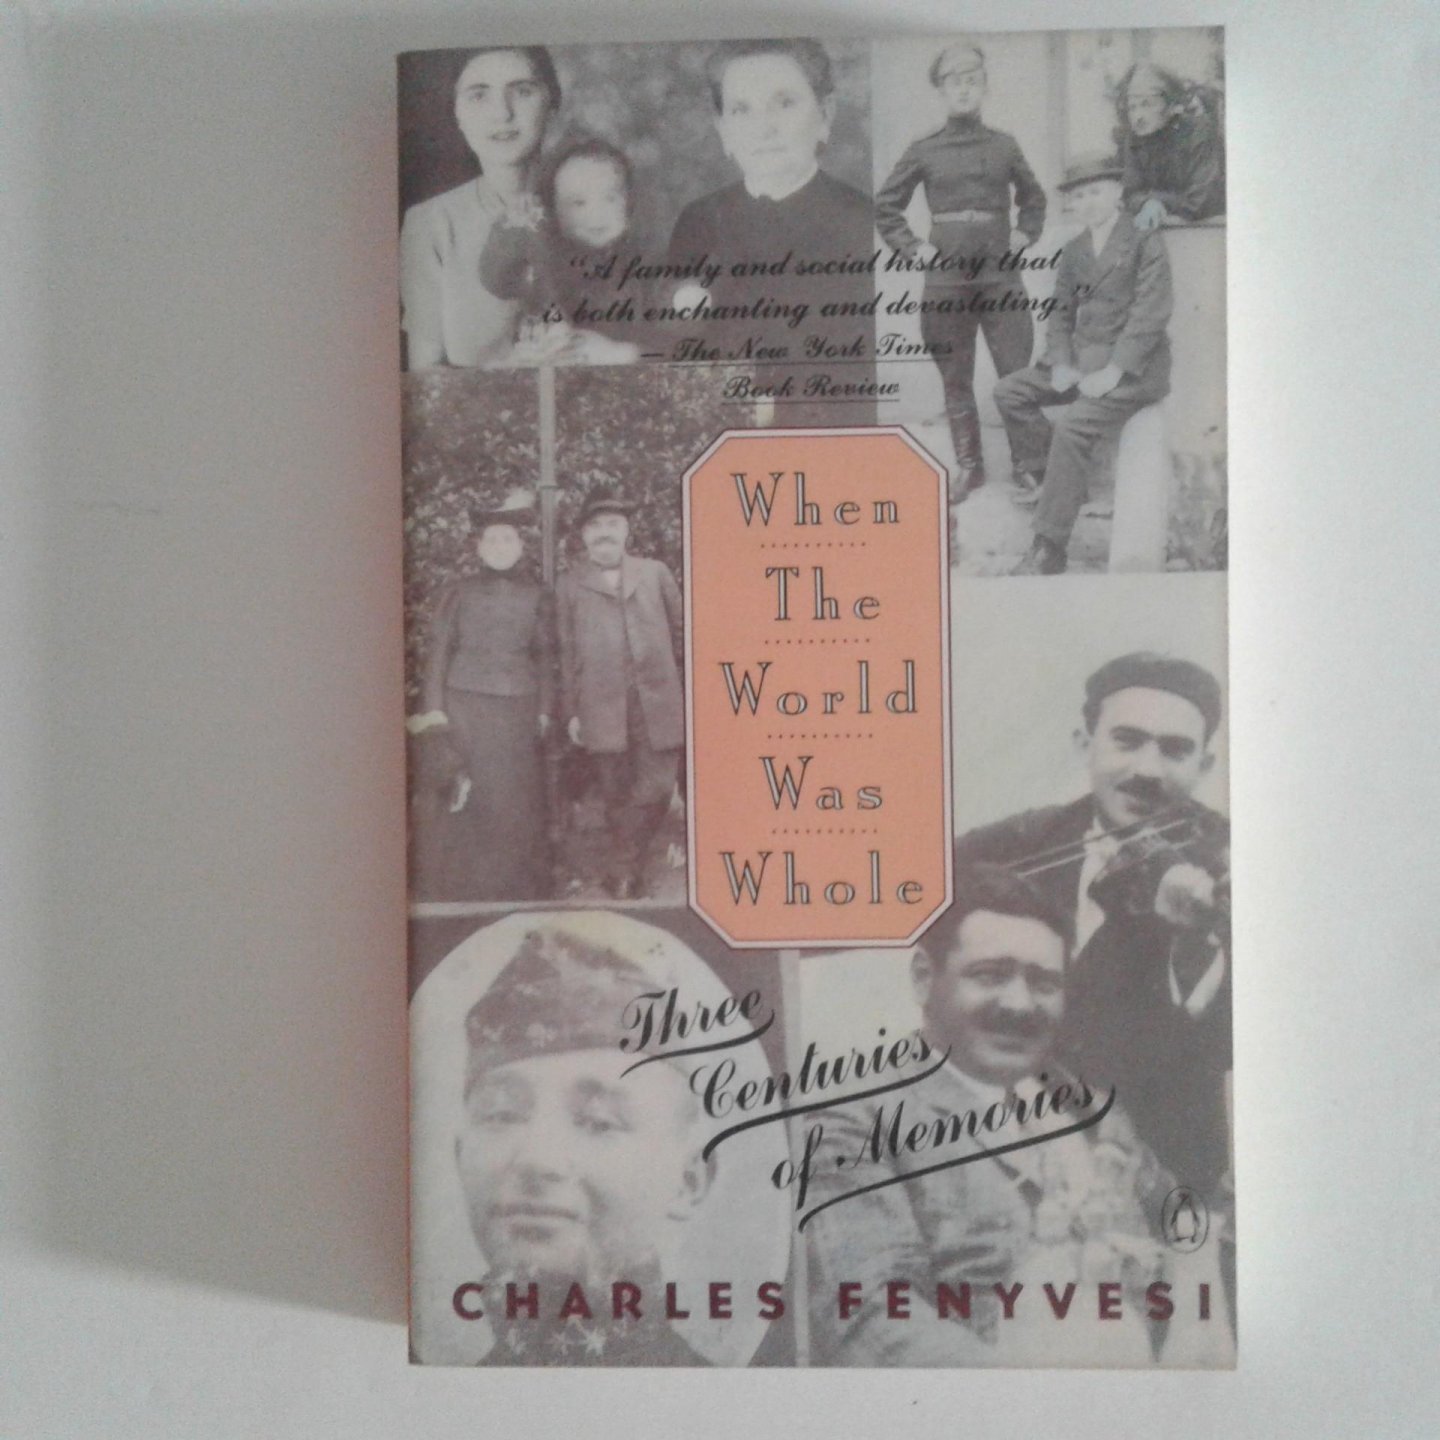 Fenyvesi, Charles - When the World was Whole ; Three centuries of memoires